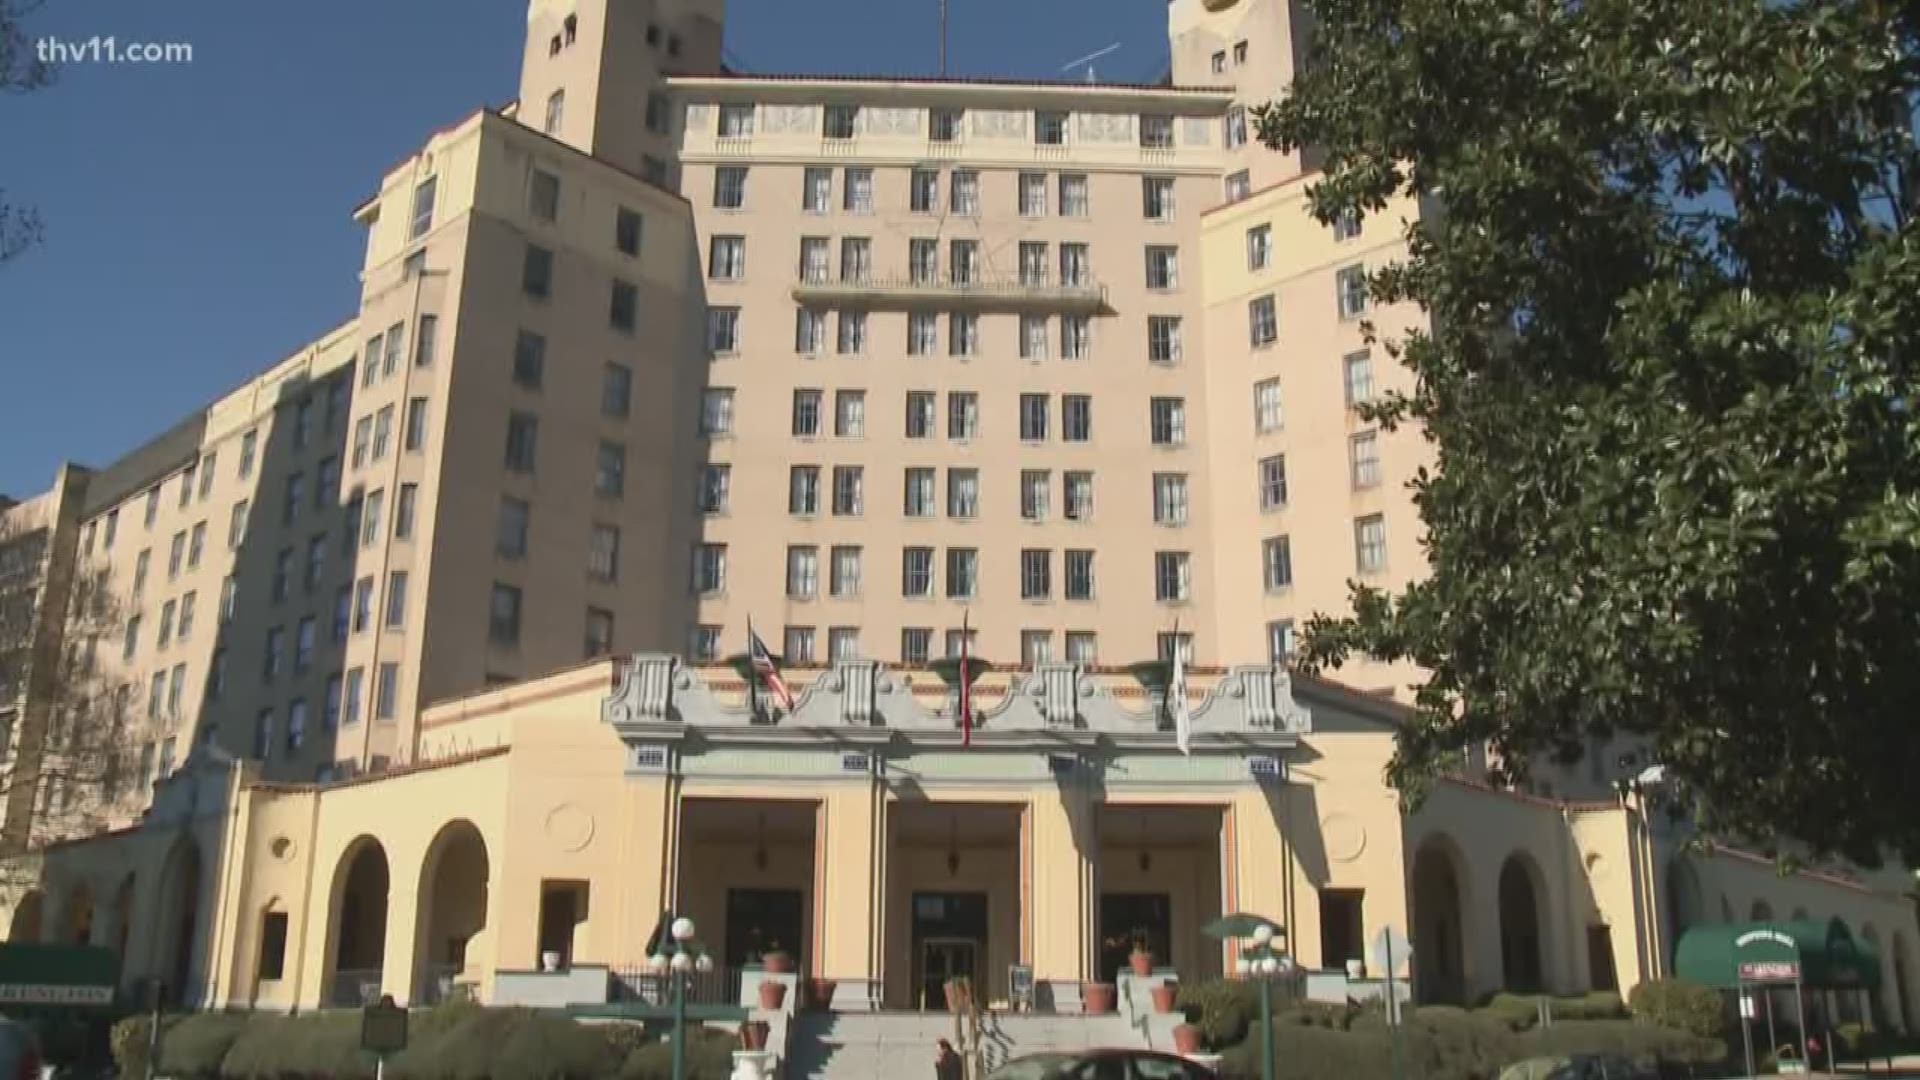 Al Rajabi is close to unveiling a $50 million plan to bring the historic Hot Springs hotel